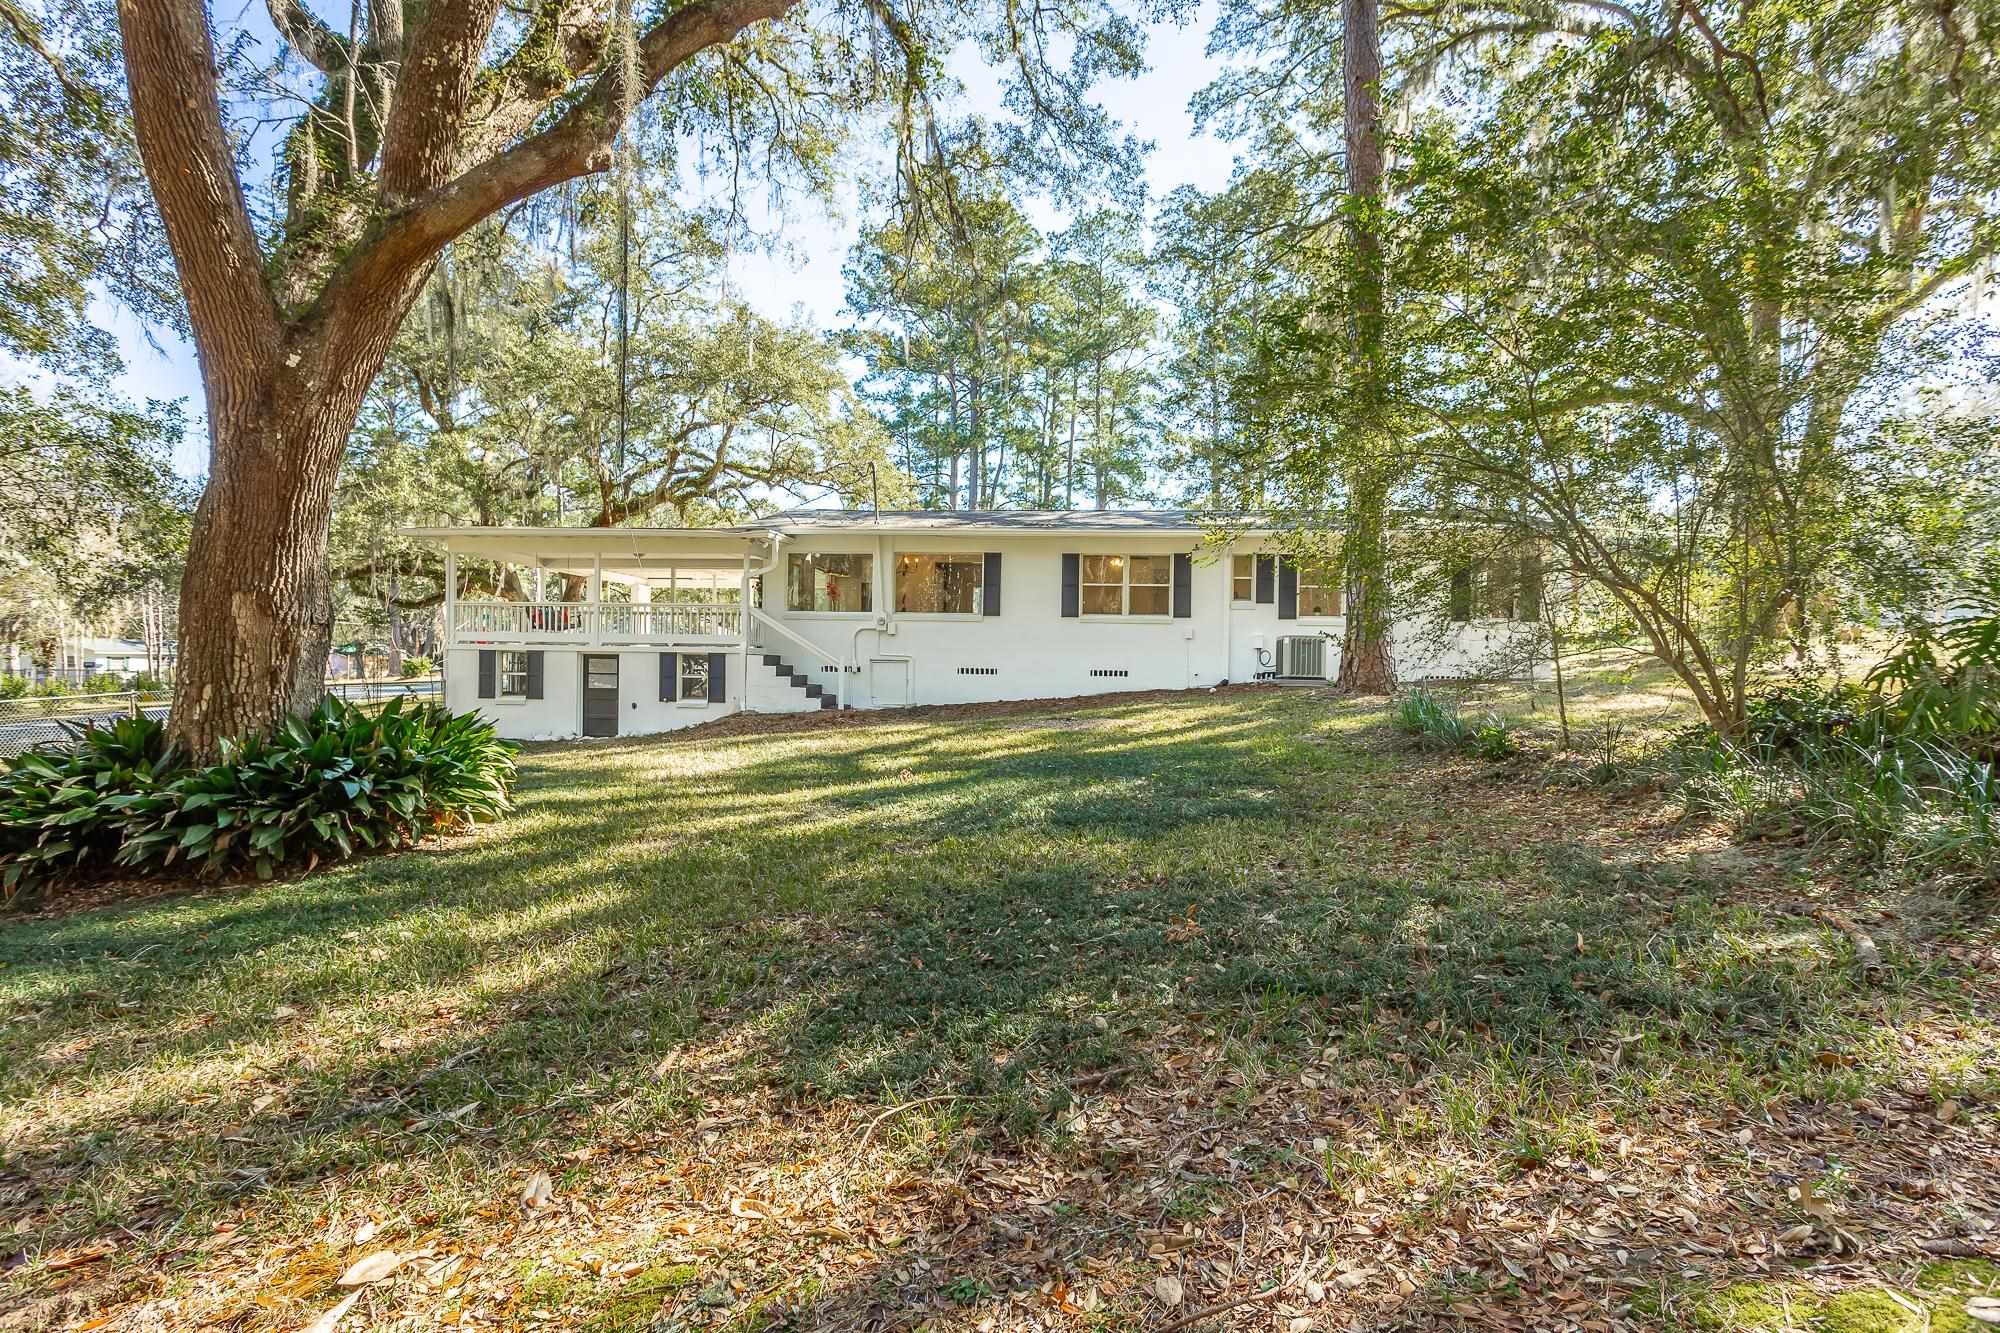 3120 Vause Drive,TALLAHASSEE,Florida 32303,3 Bedrooms Bedrooms,1 BathroomBathrooms,Detached single family,3120 Vause Drive,370291